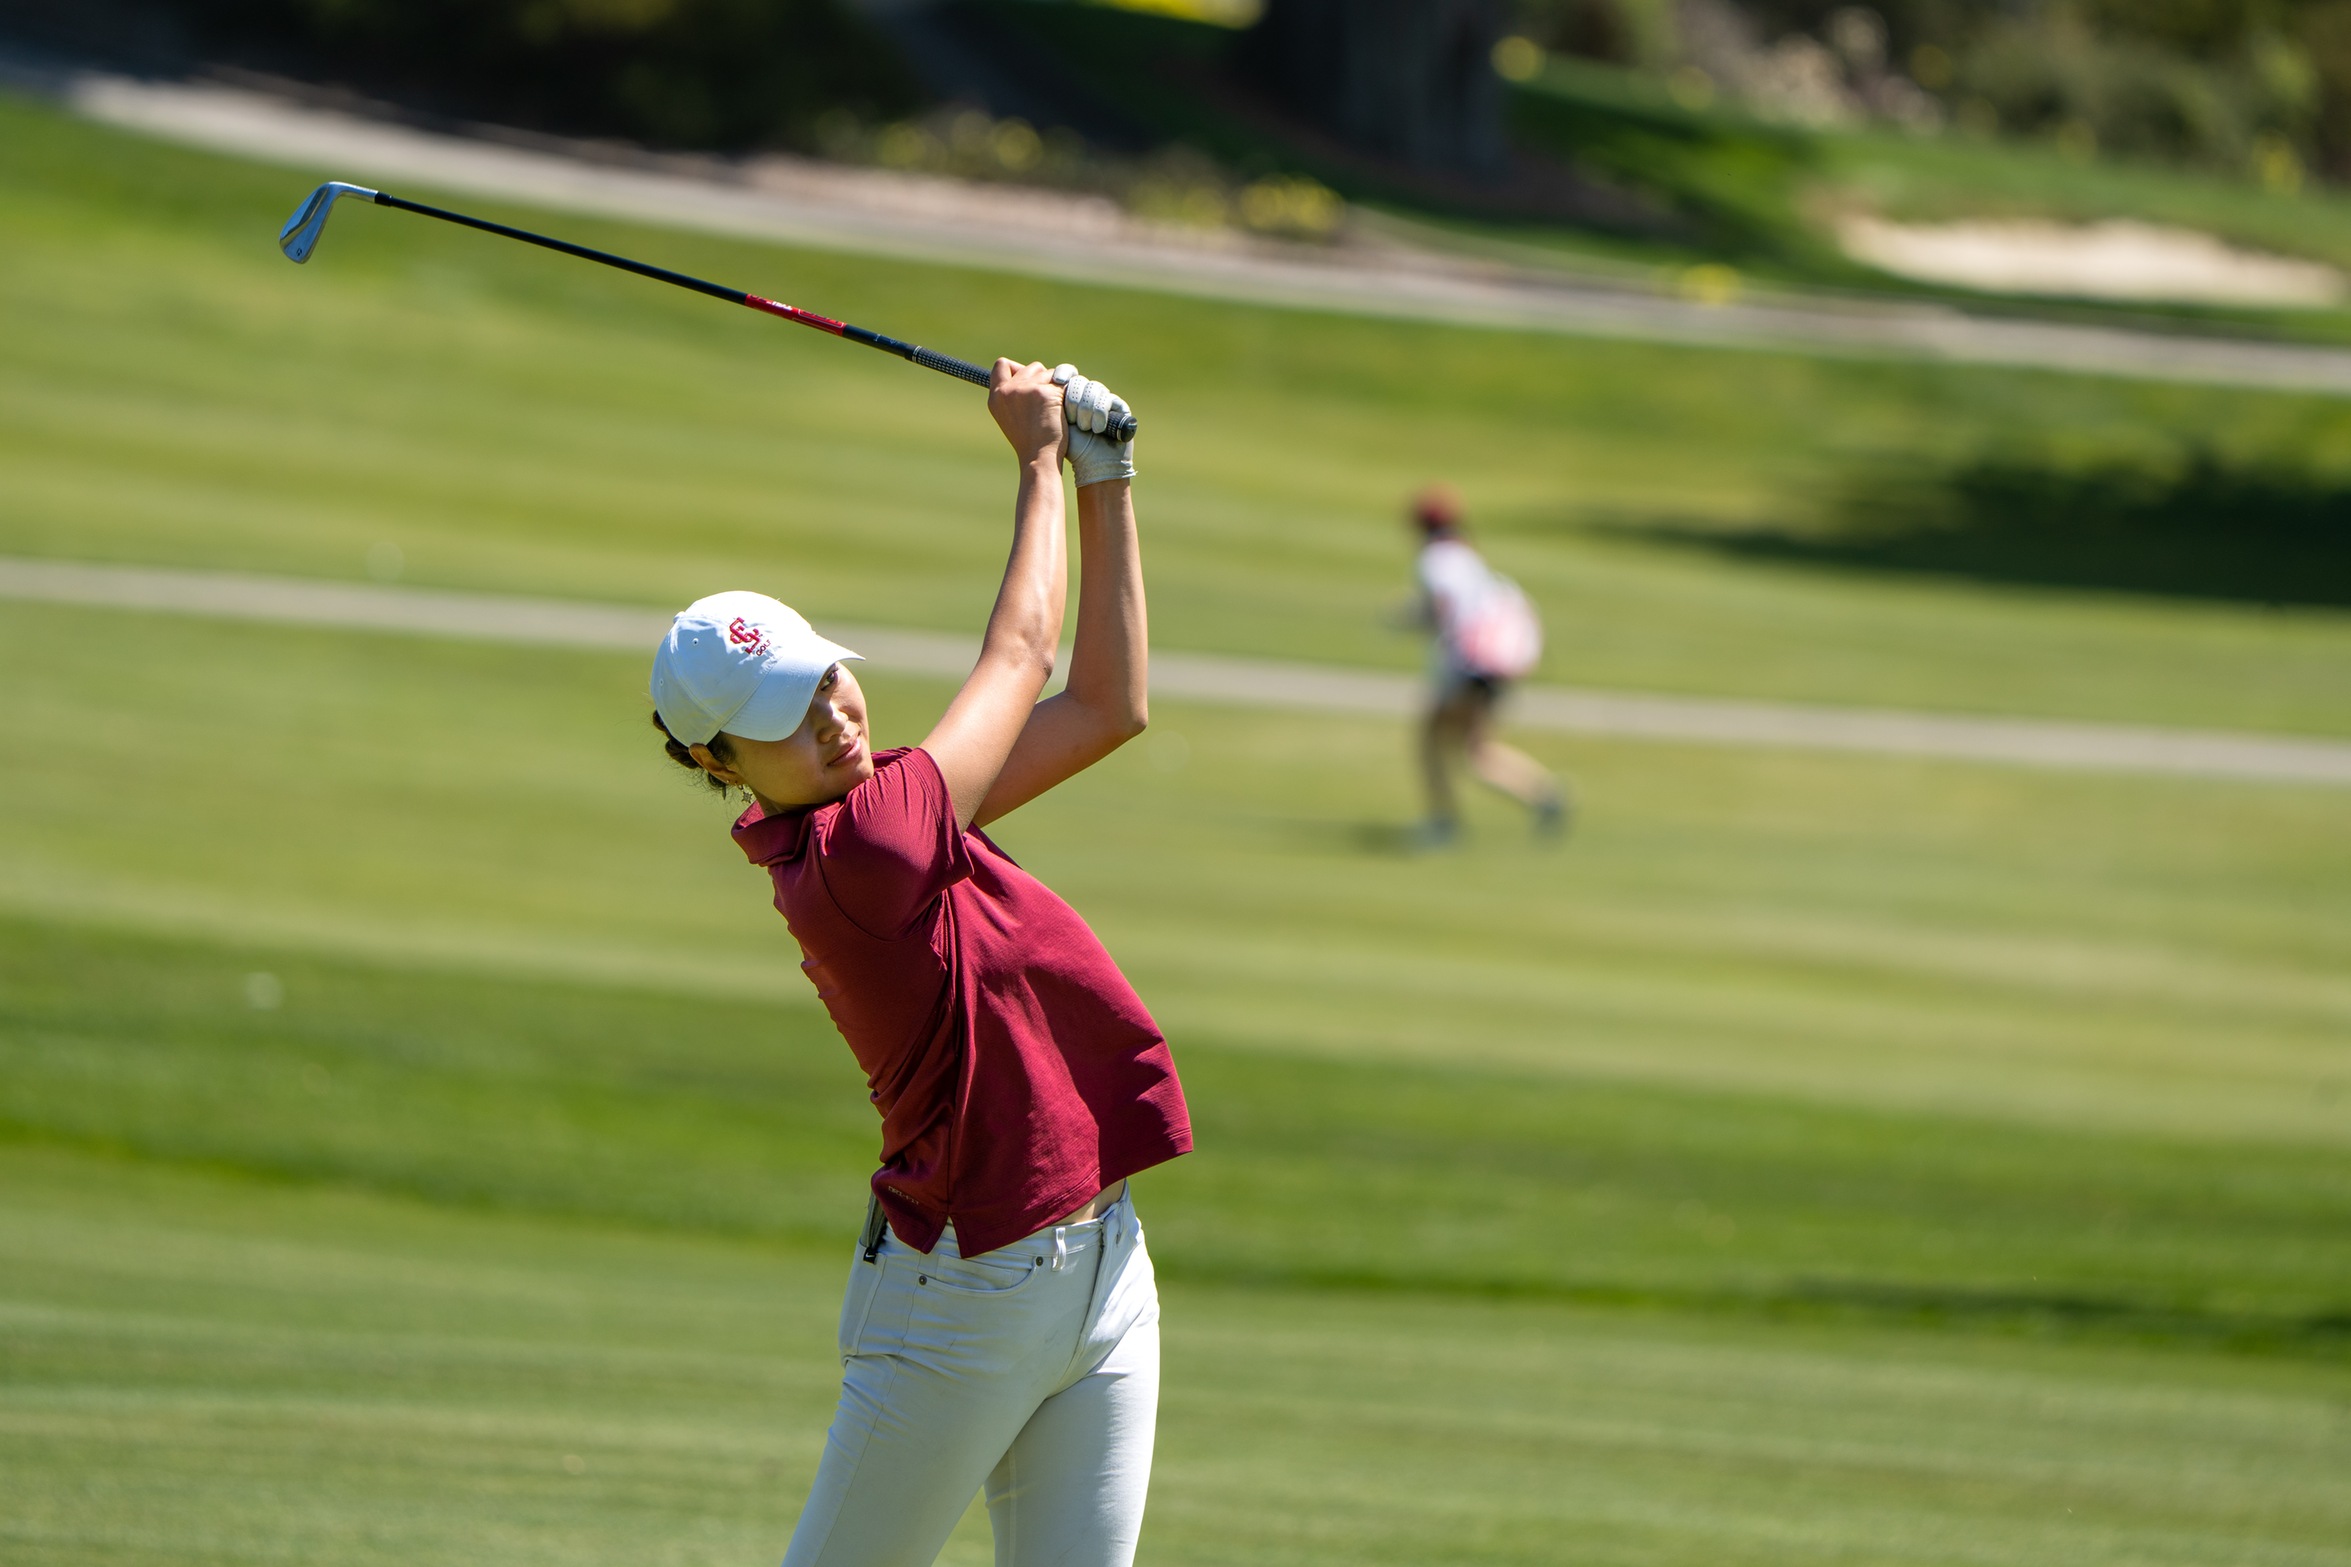 Broncos Close Out Season With 5th Place Finish At WCC Championship